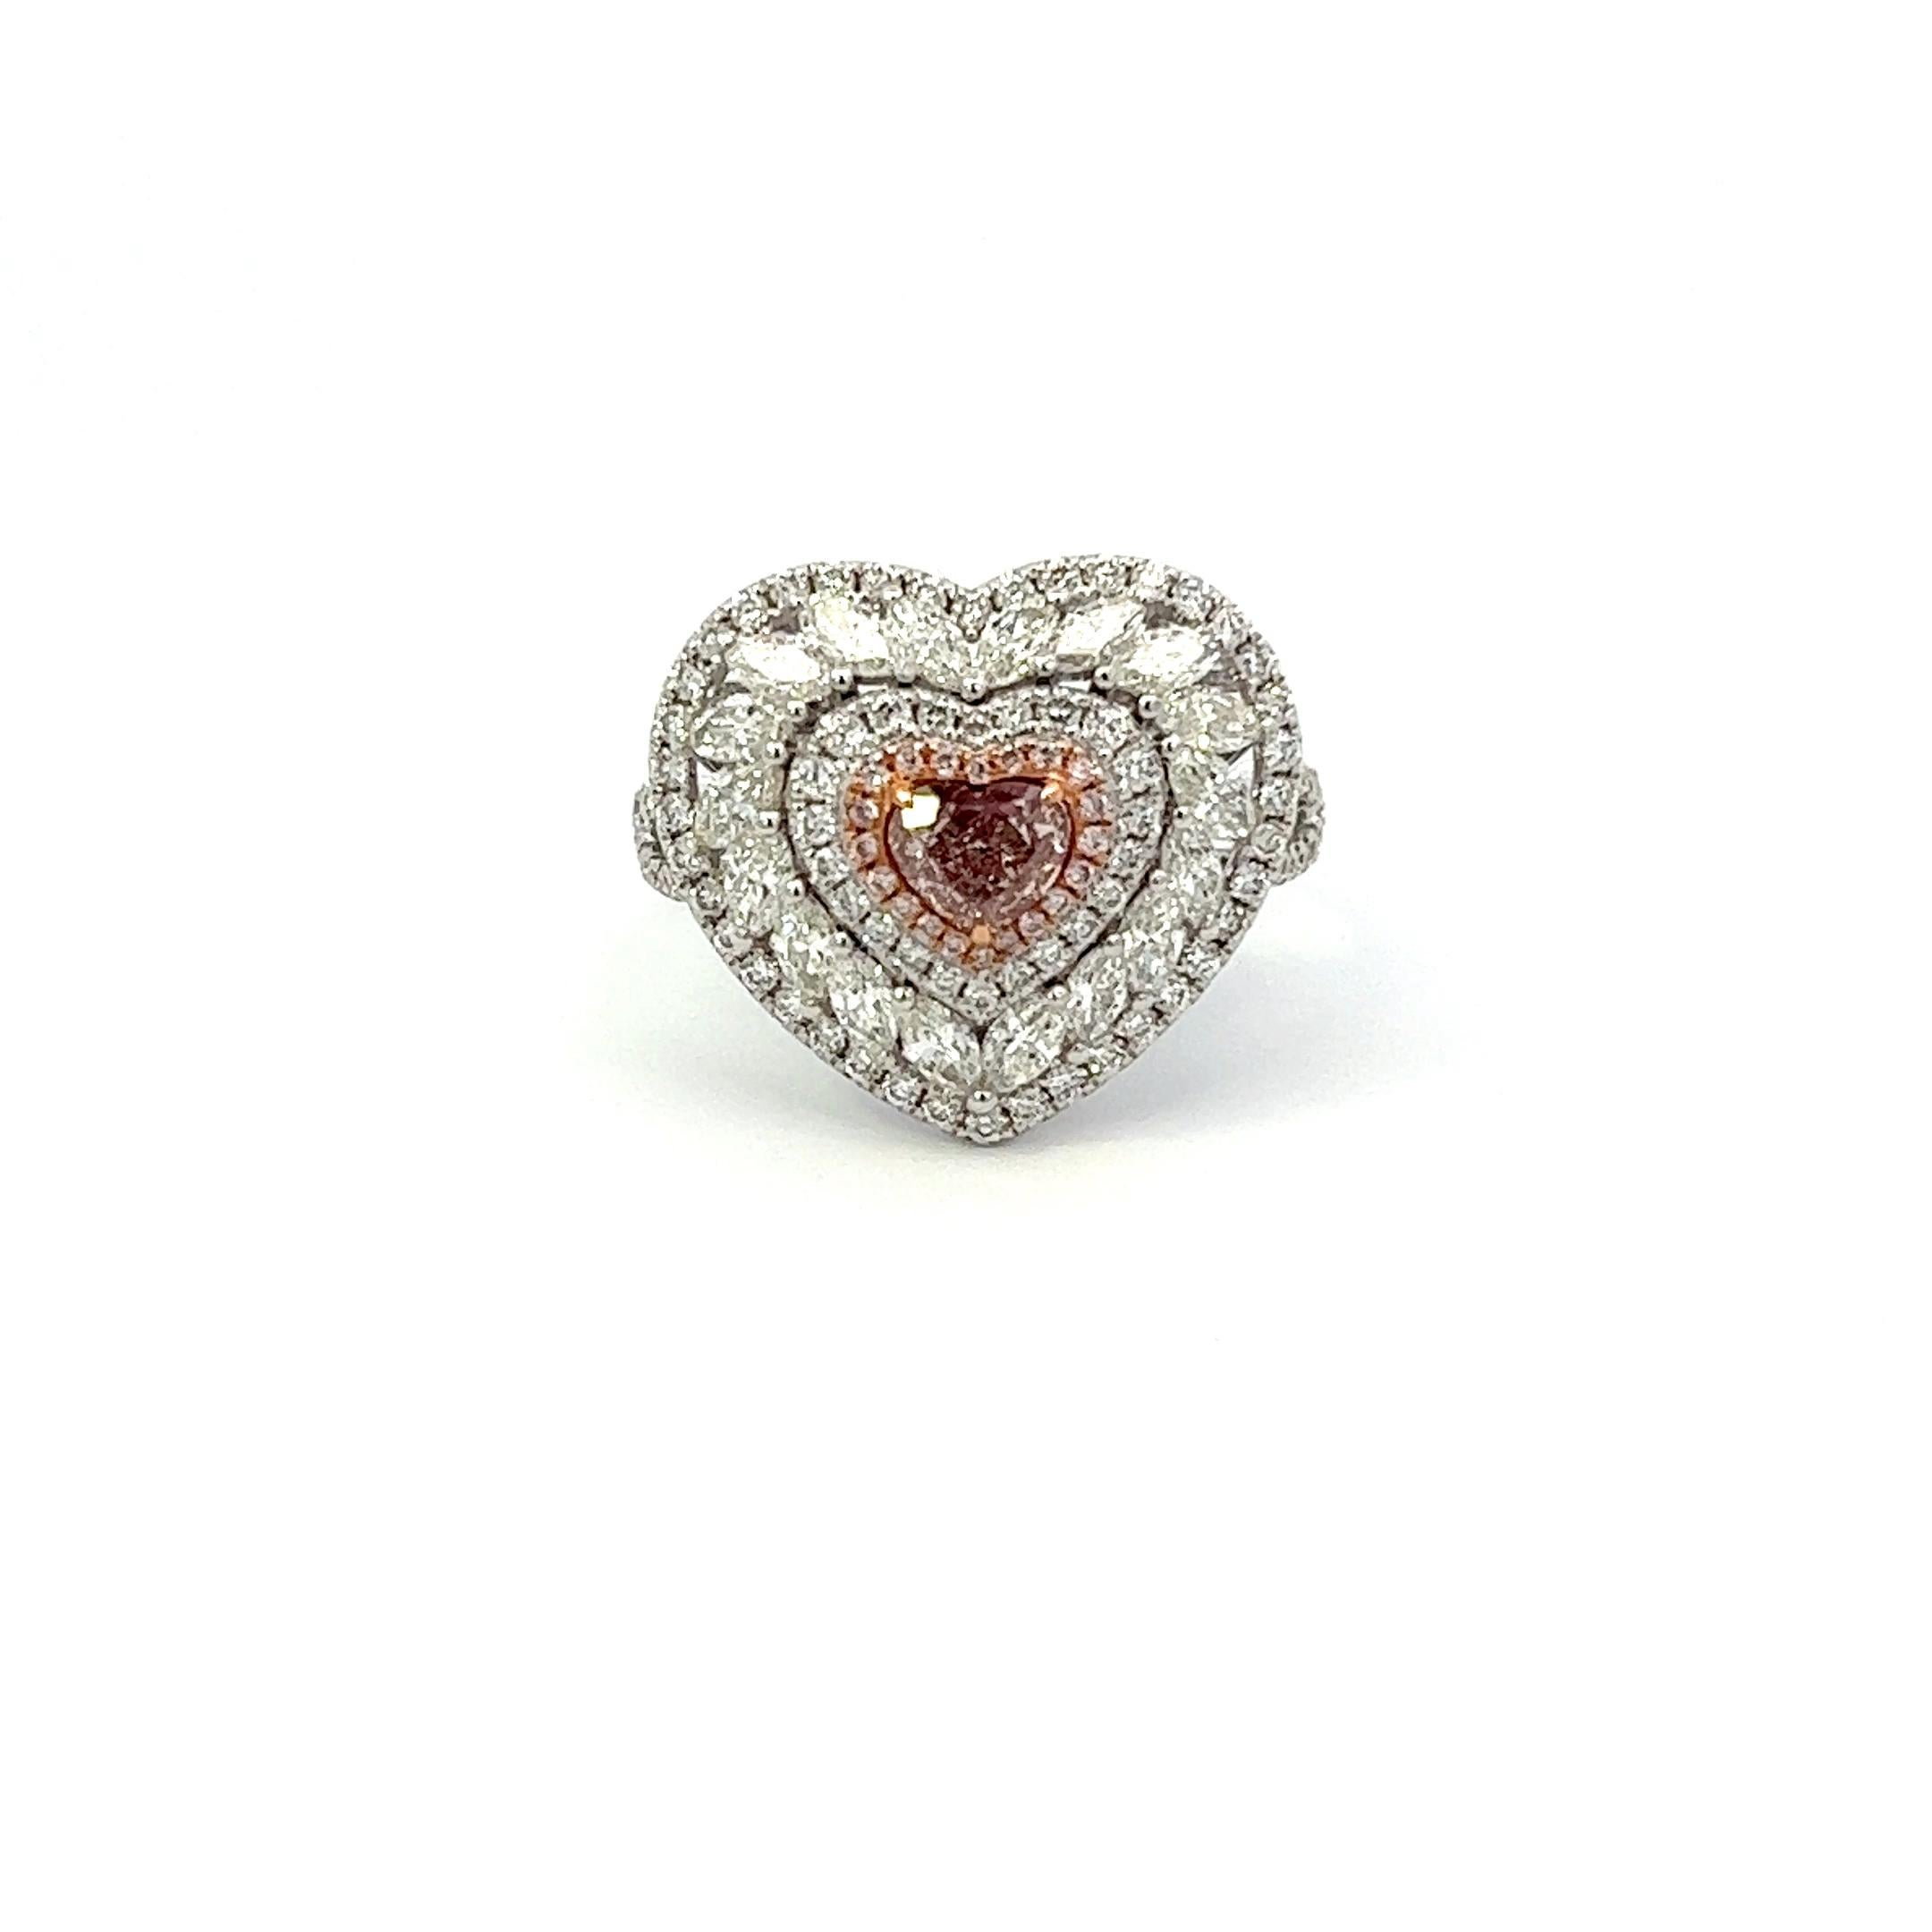 Center: 0.50ct Fancy Light Pinkish Brown Heart VS2 GIA# 2404855672
Setting: 18k White Gold 1.48ctw Pink and White Diamonds

An extremely rare and stunning natural pink diamond center. Pink Diamonds account for less than 0.01% of all diamonds mined